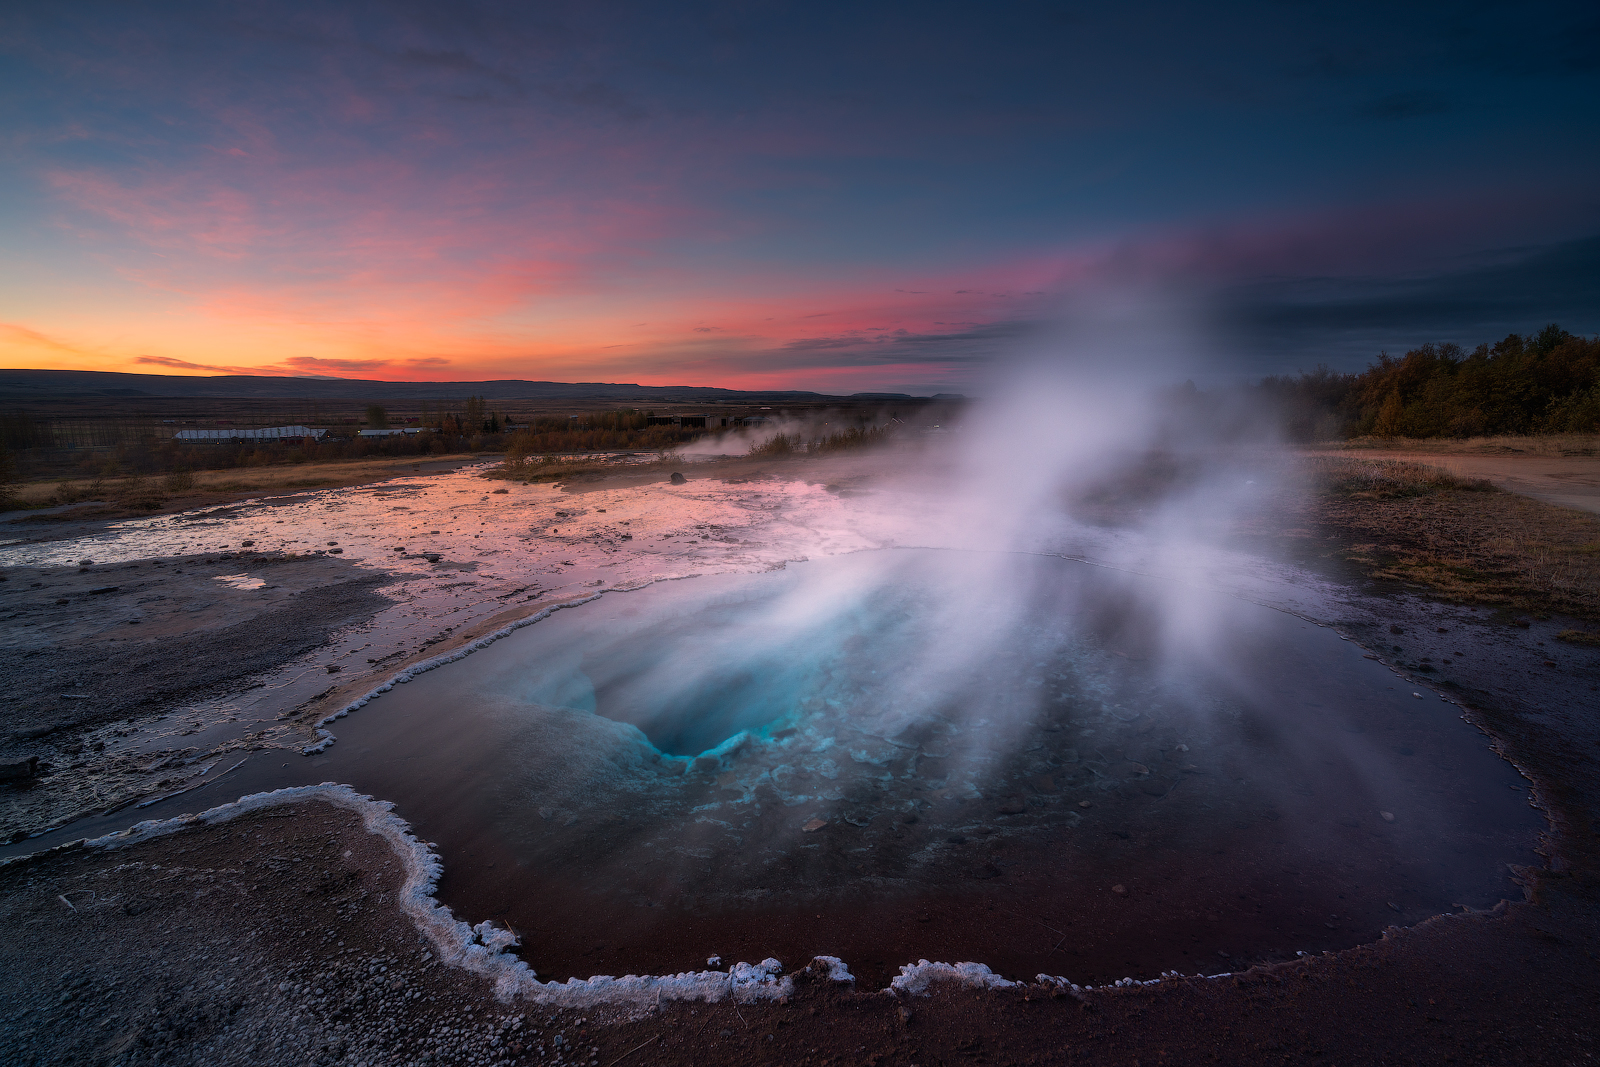 Strokkur hot spring erupting, gushing boiling geothermal water high into the air.